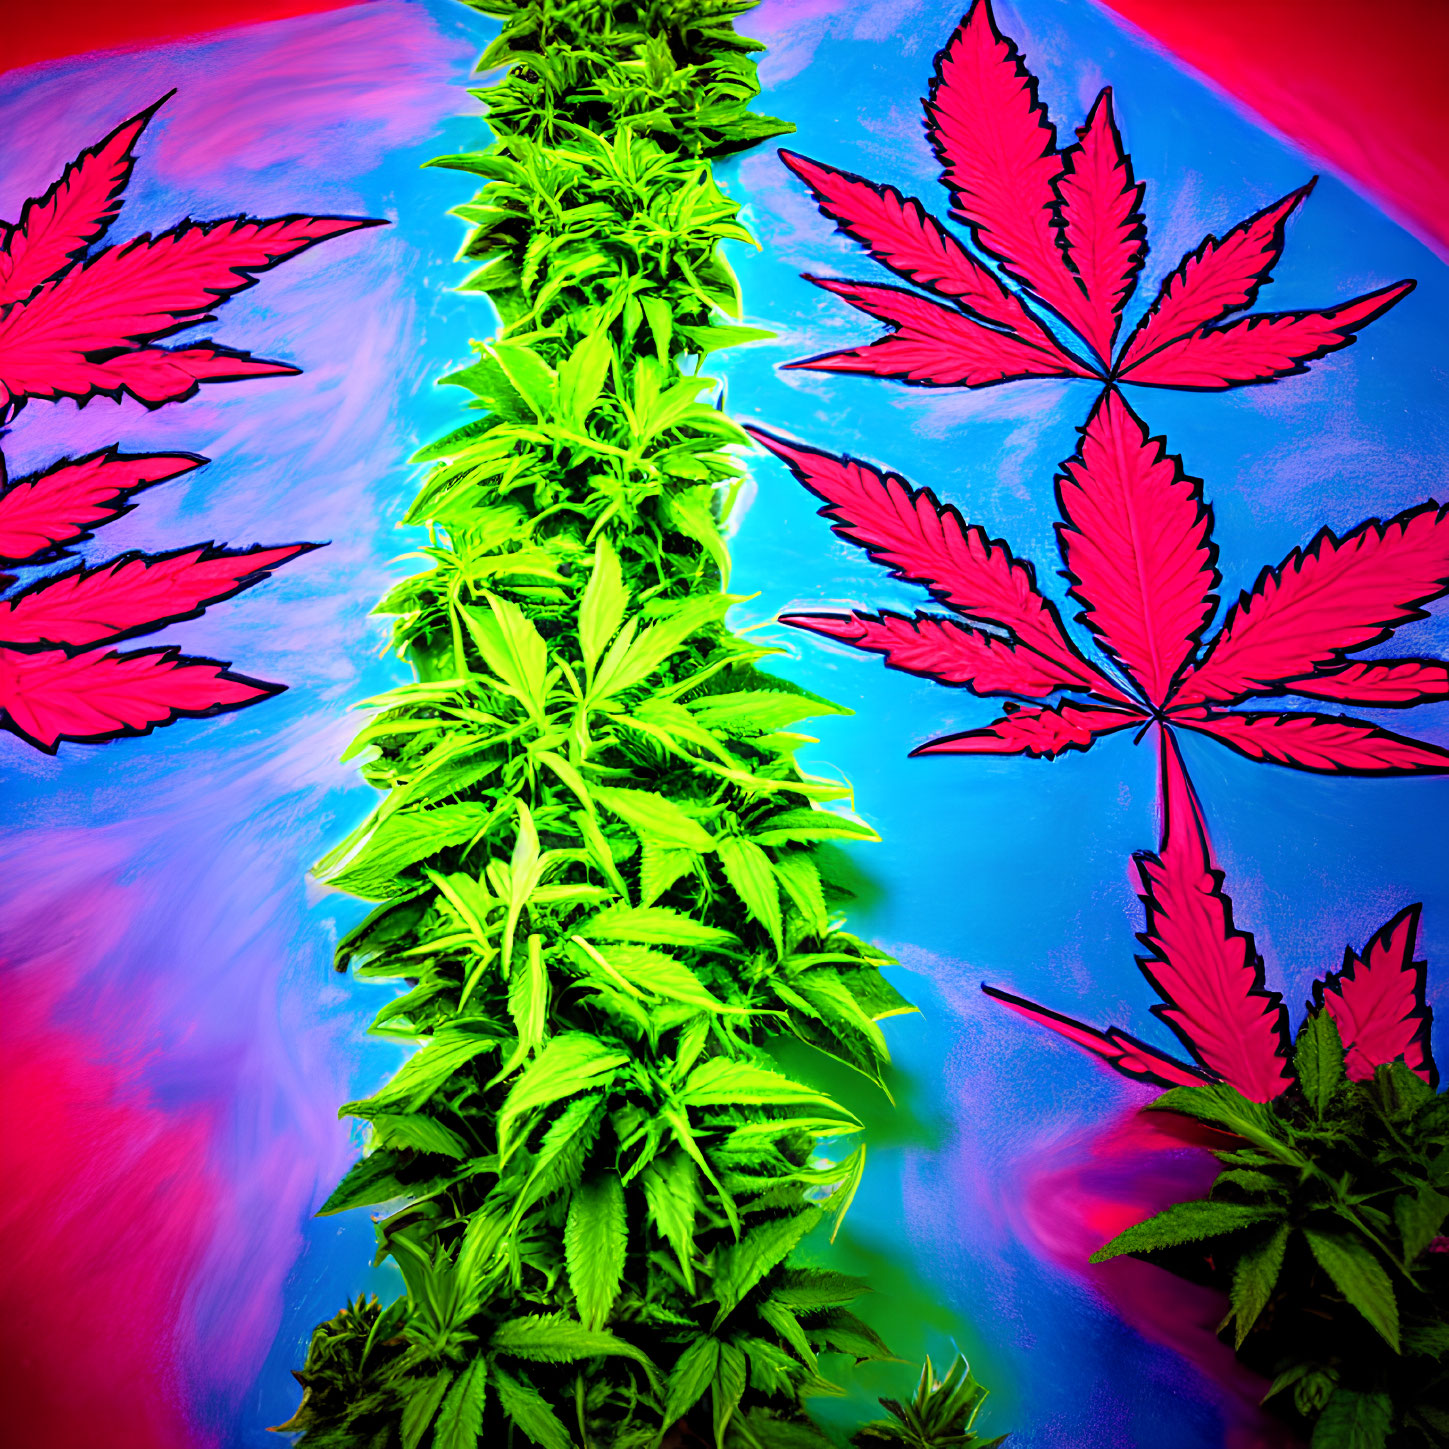 Colorful cannabis leaves against swirling backdrop in vivid image